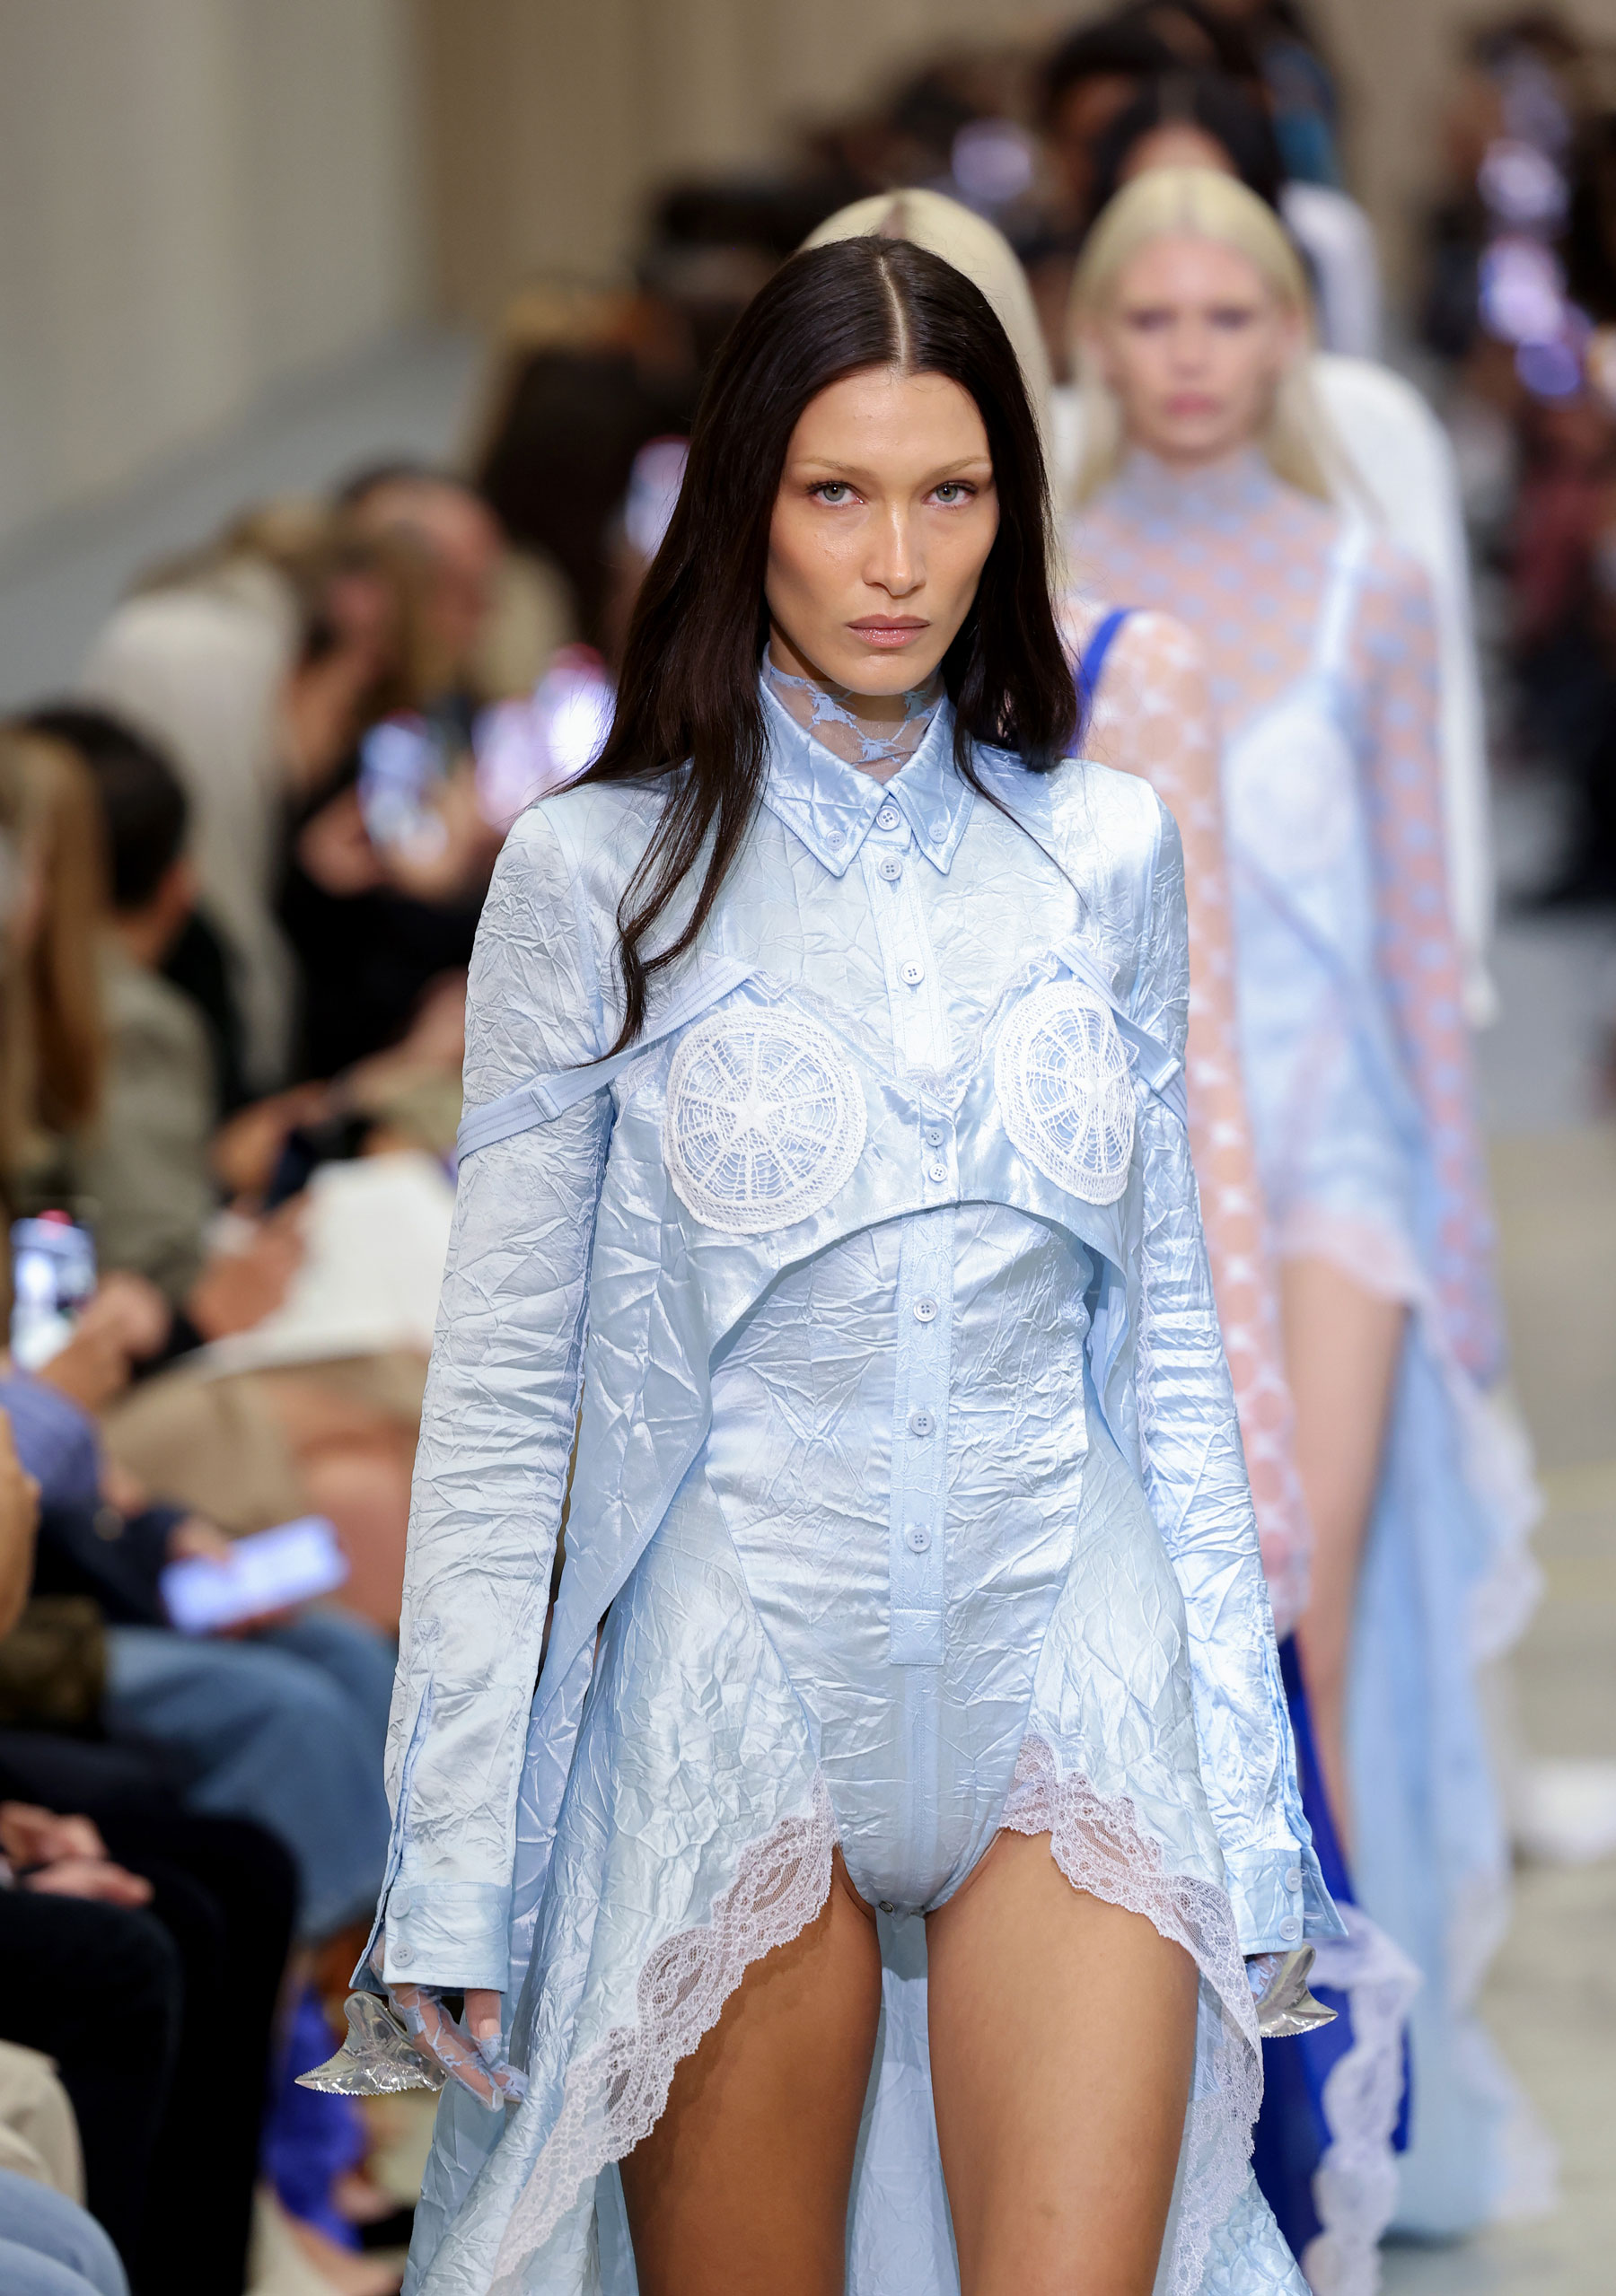 Bella hadid walks the runway for burberry wearing a light blue outfit